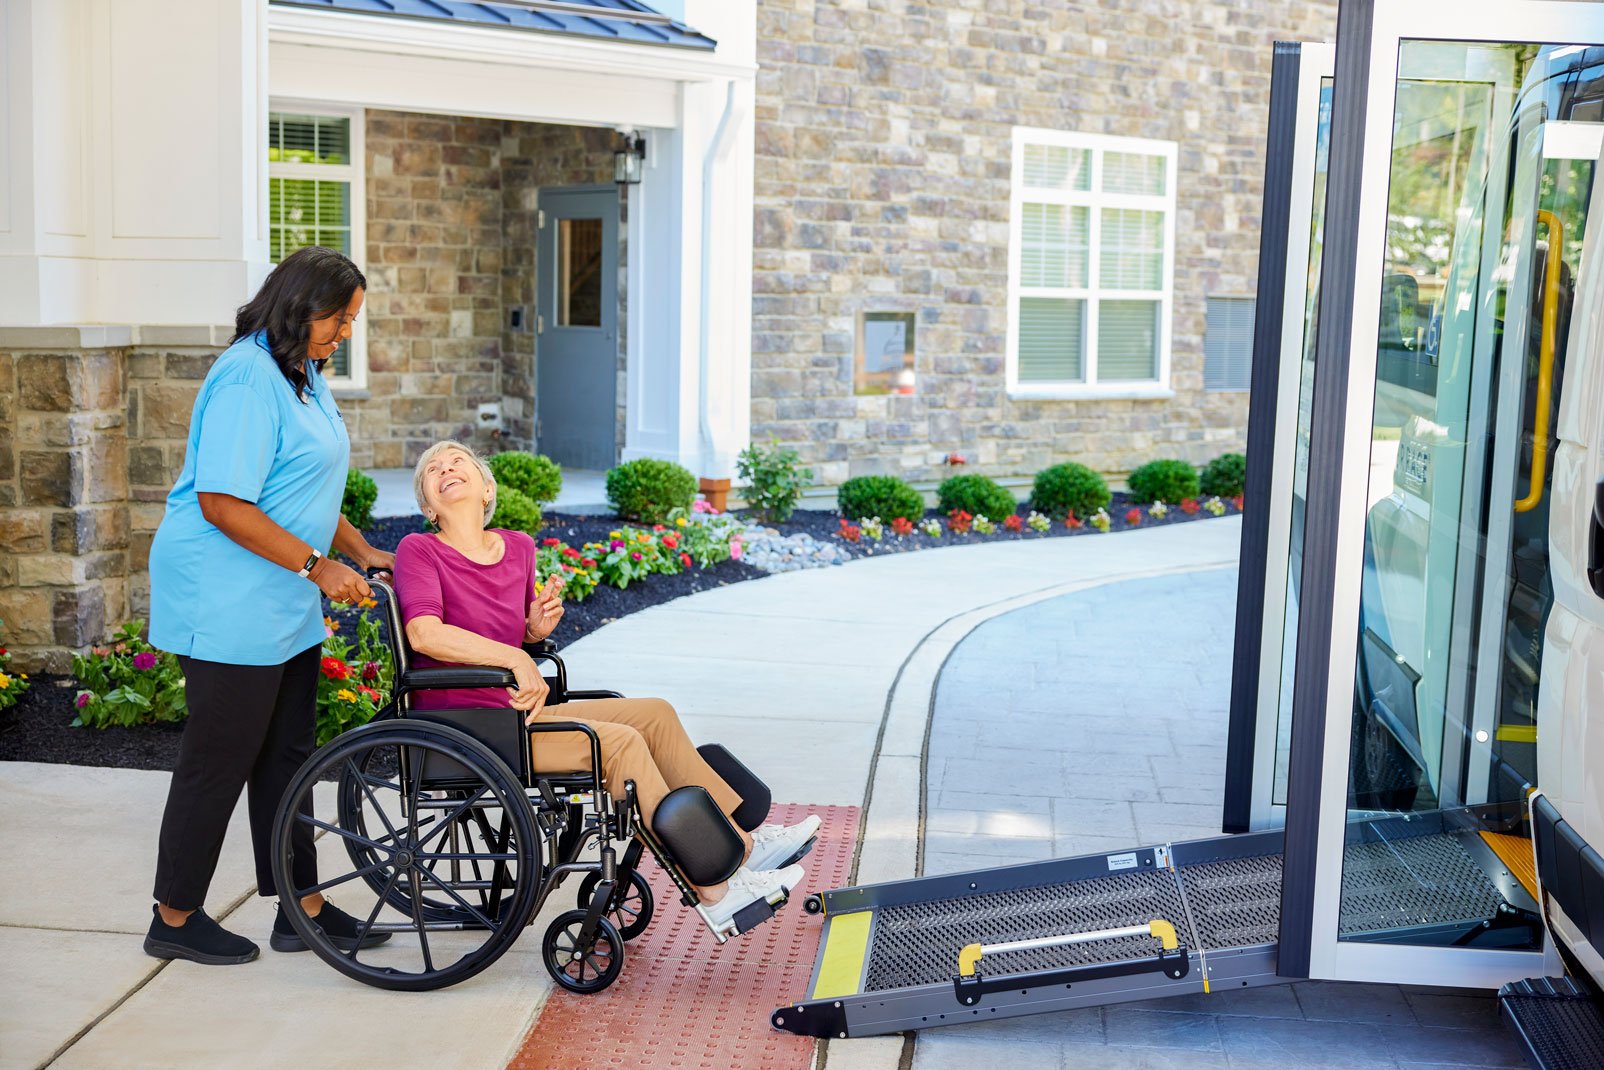 Resident caregiver working in assisted living helps resident in wheelchair